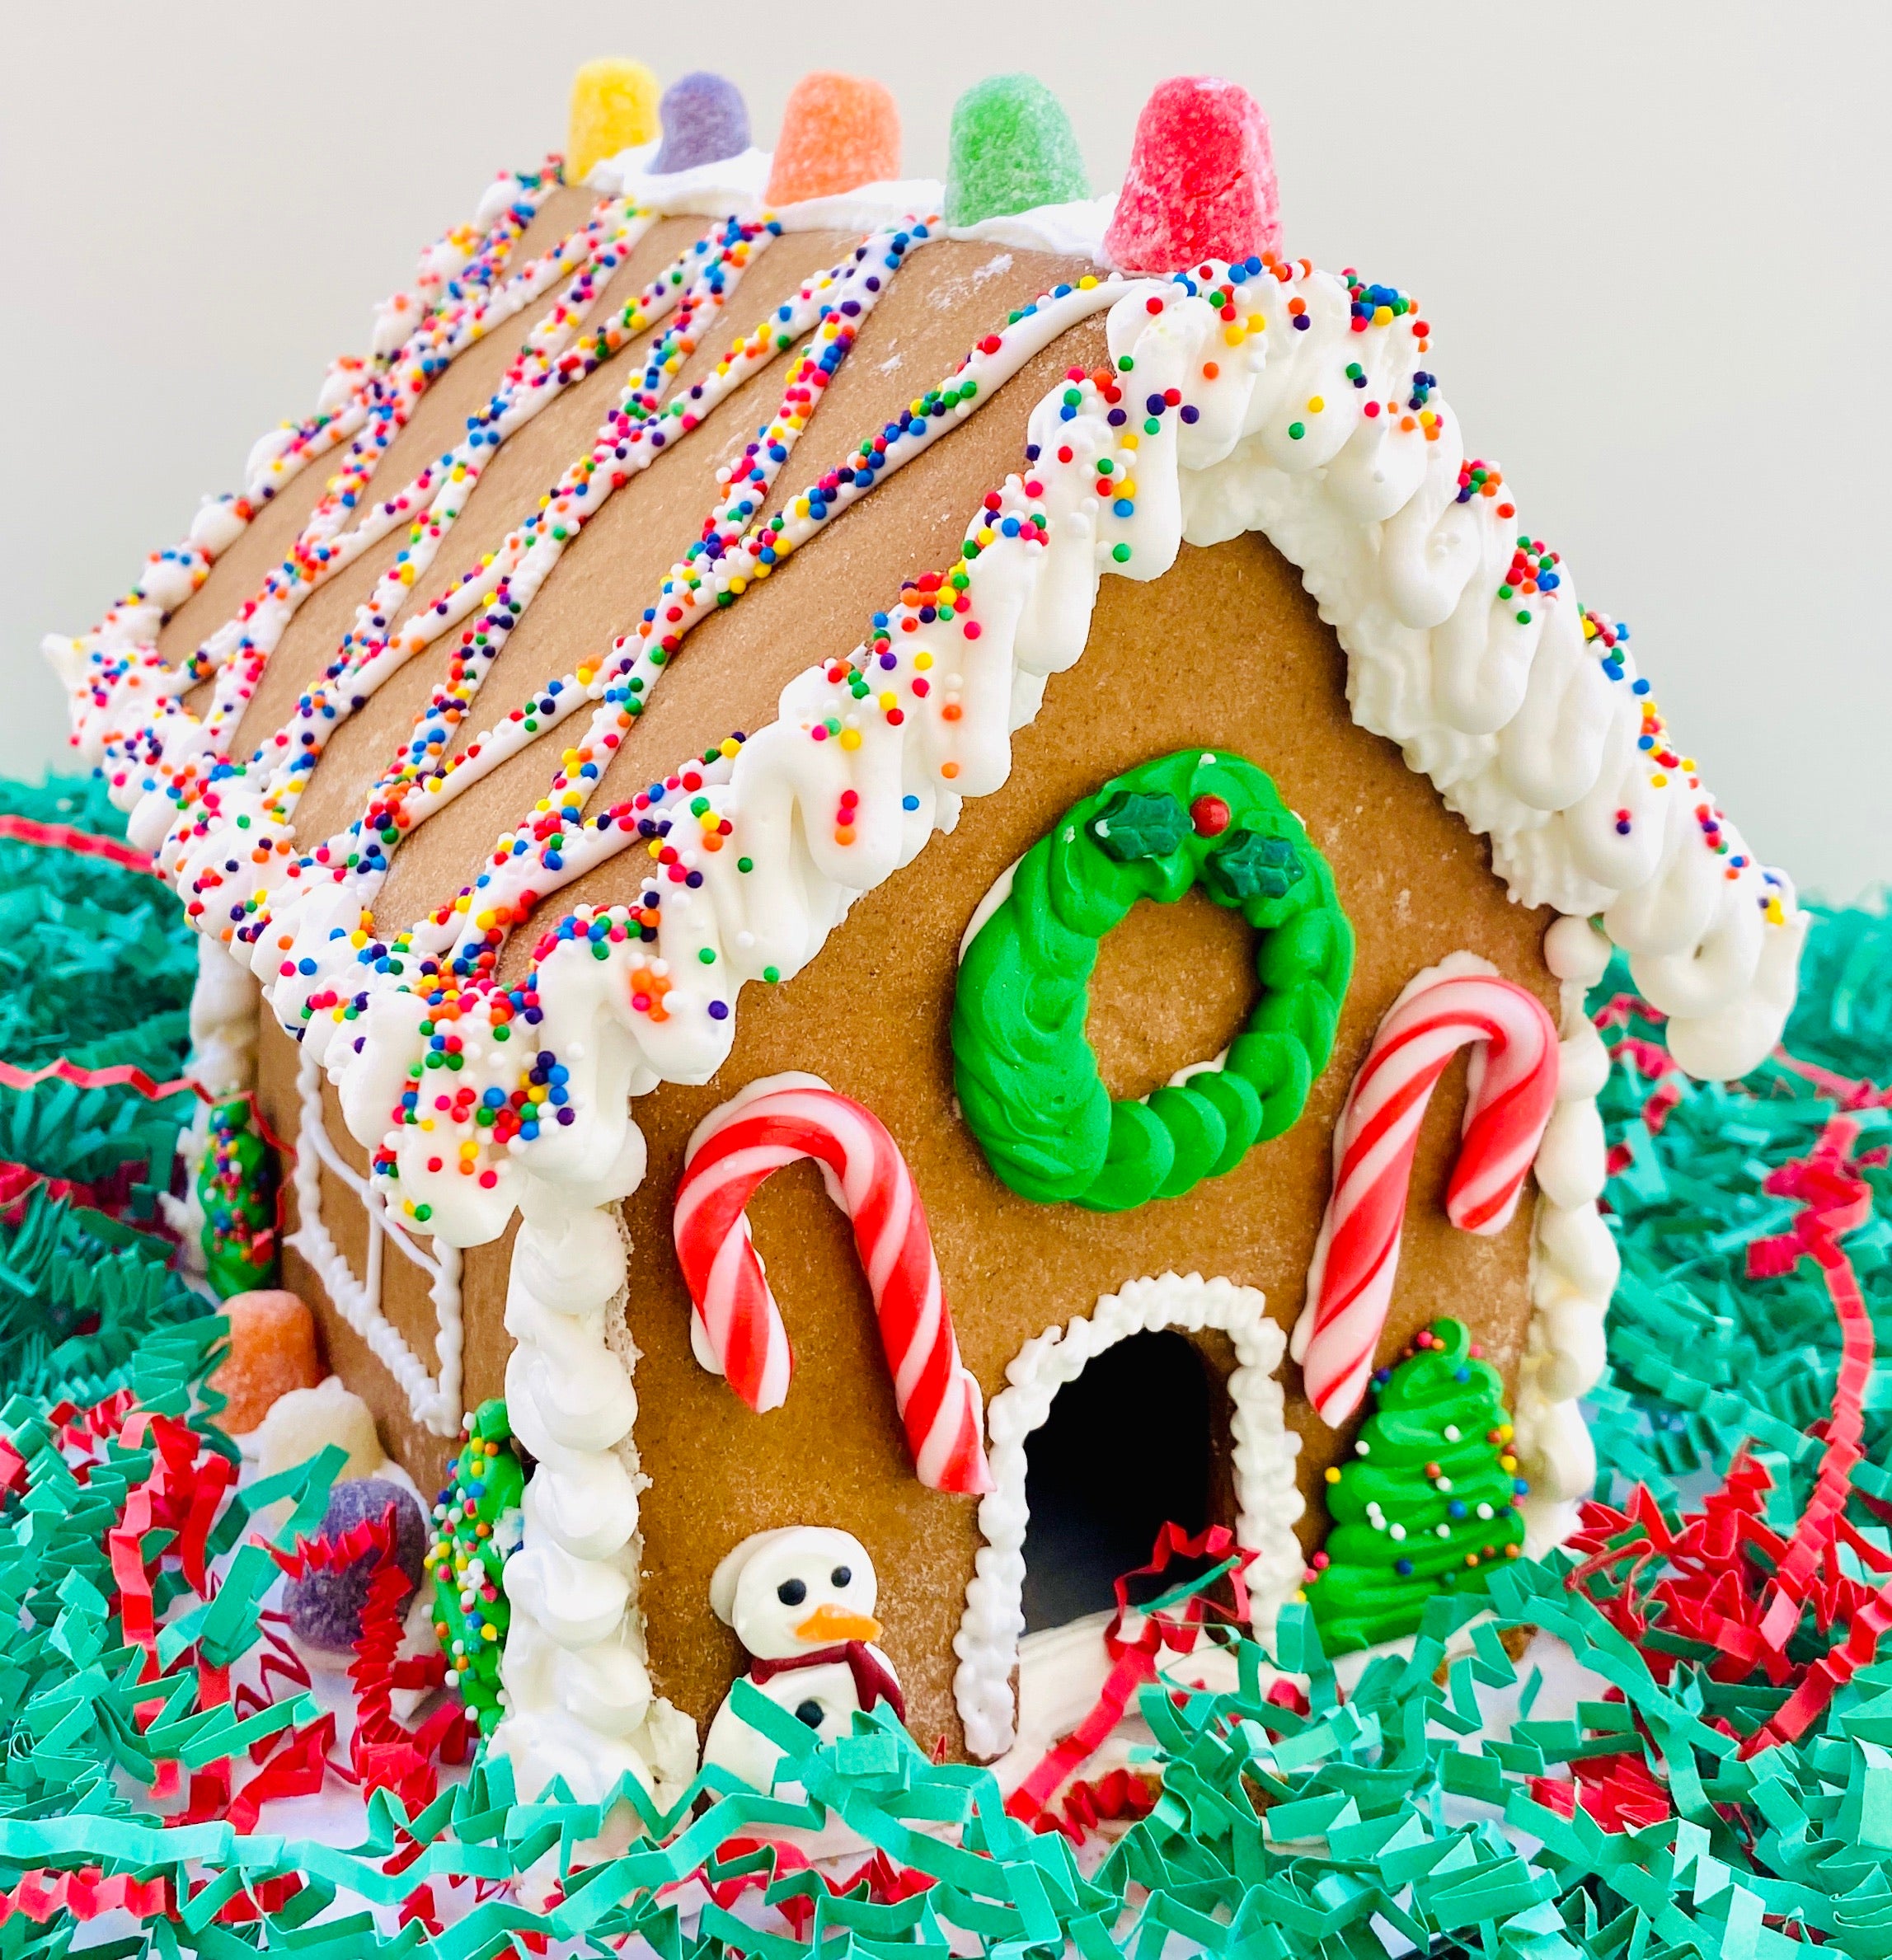 OUR SIGNATURE GINGERBREAD HOUSE